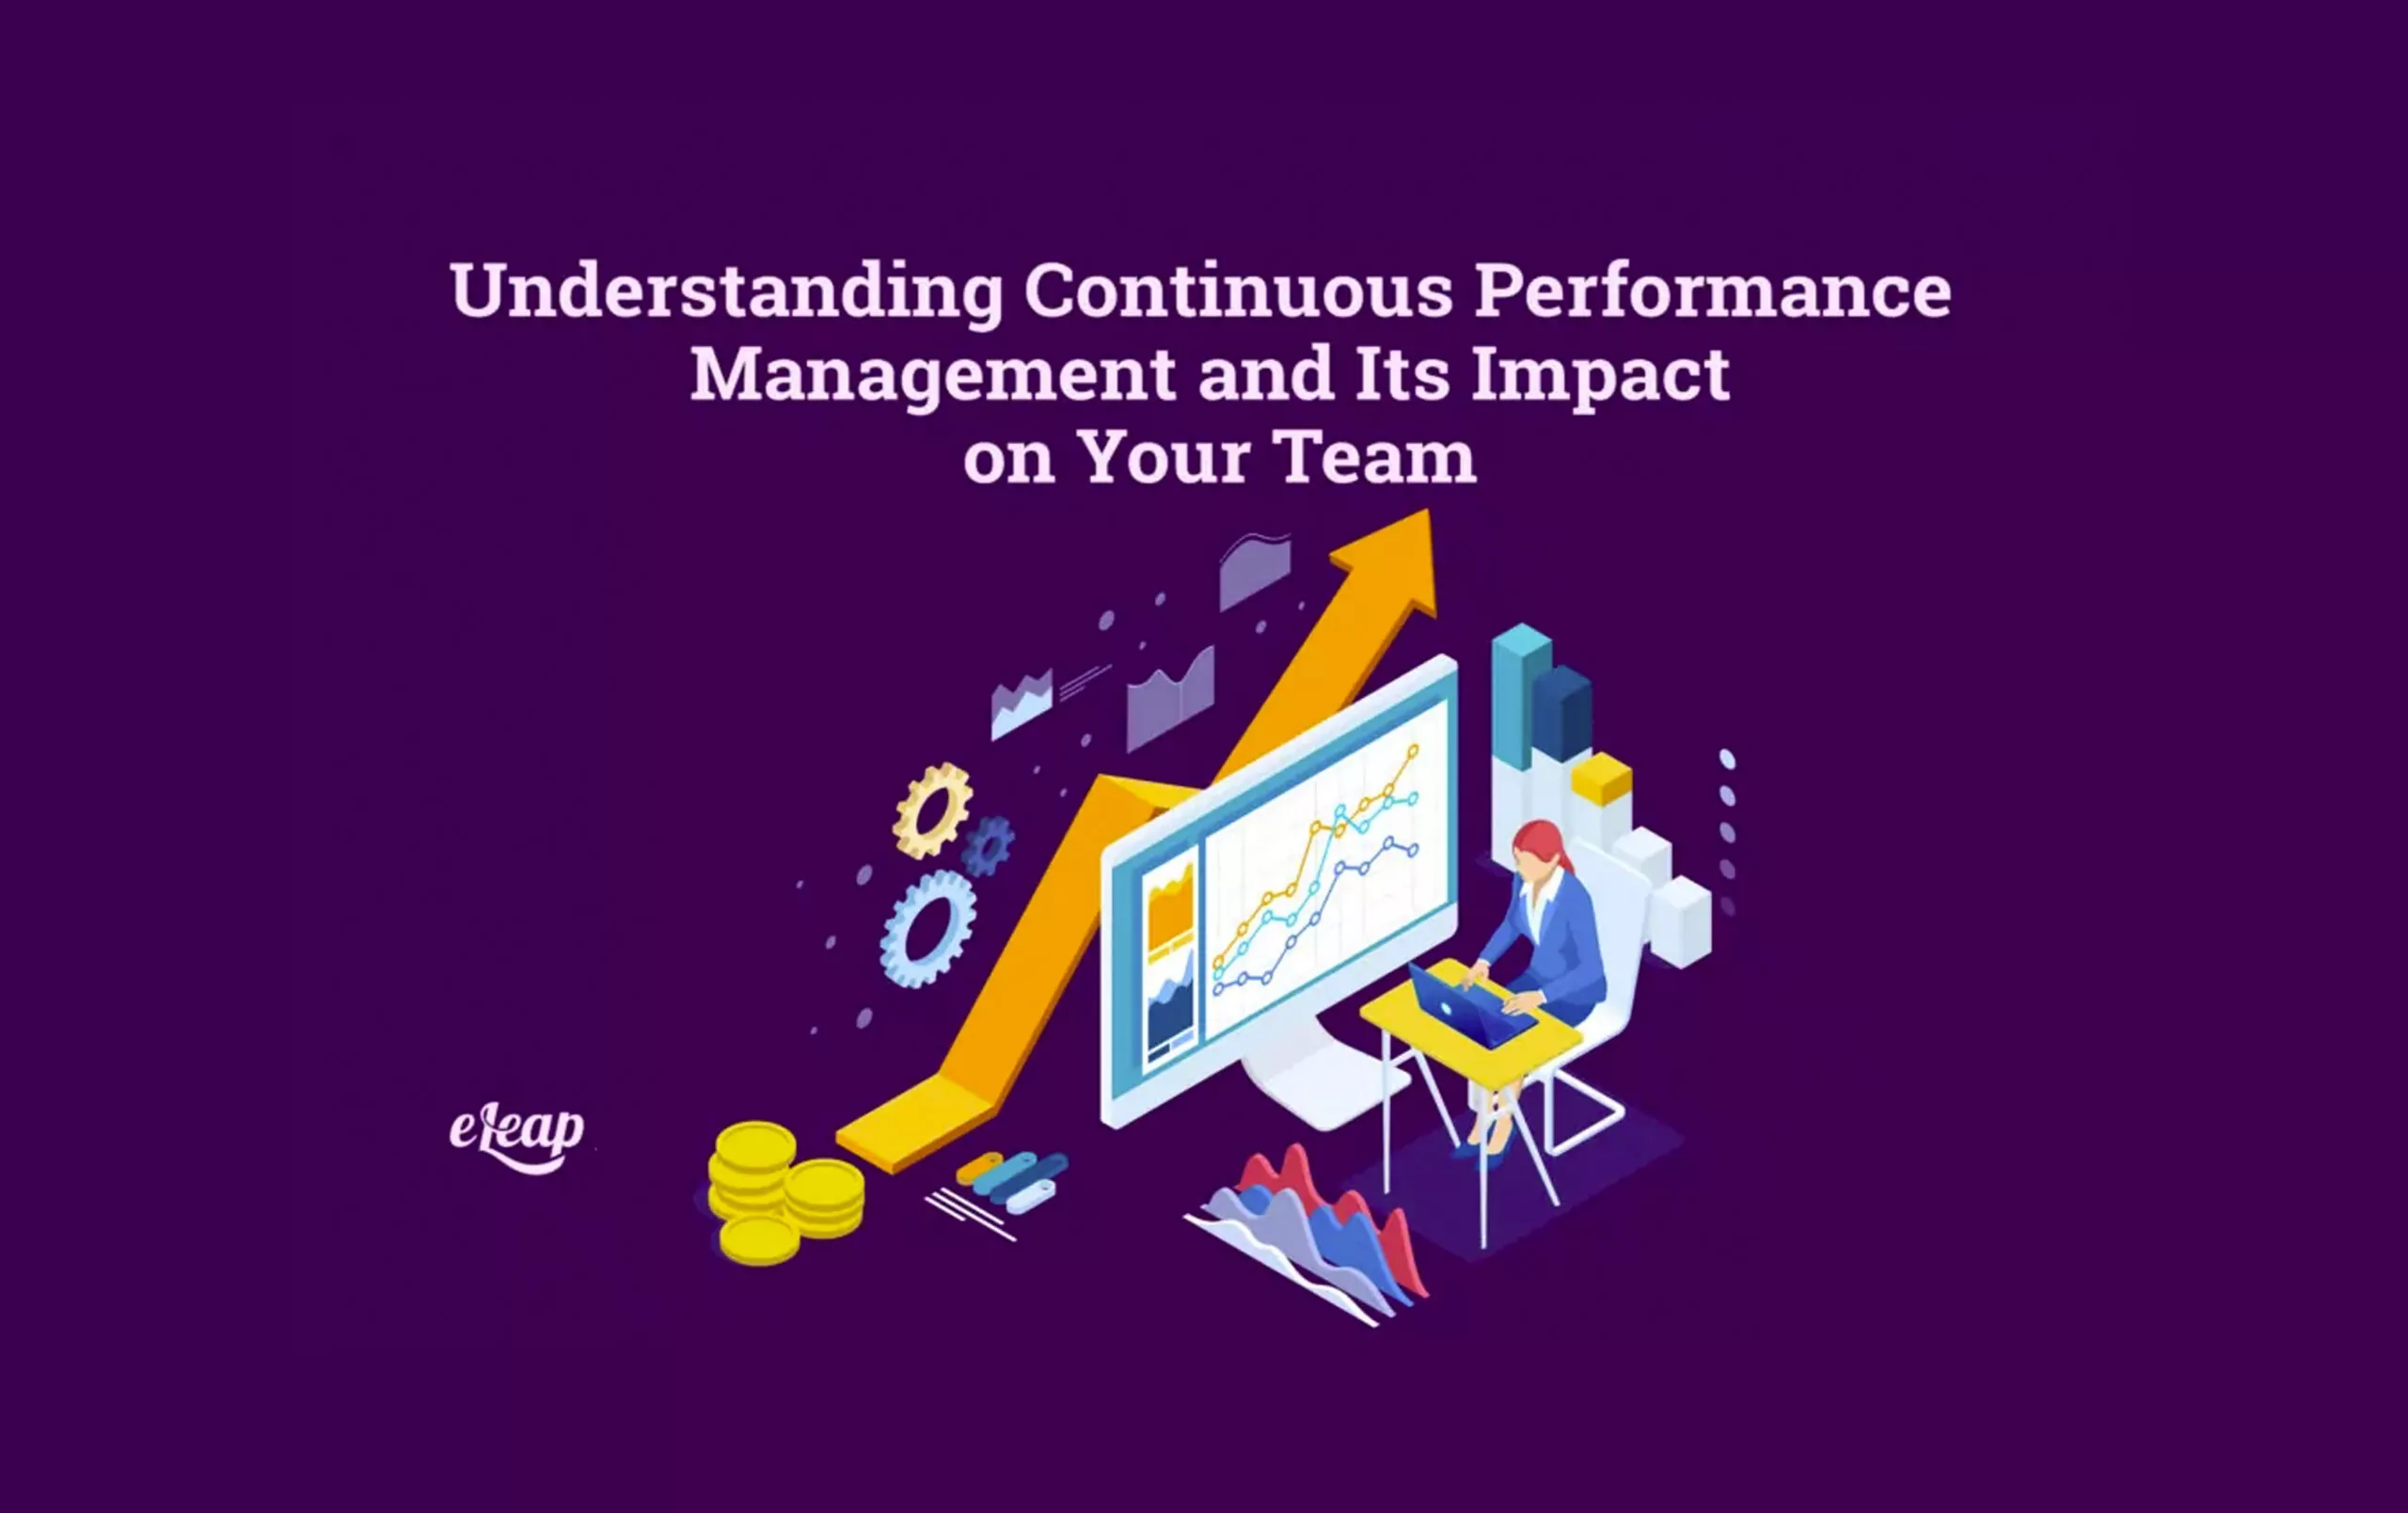 Understanding Continuous Performance Management and Its Impact on Your Team